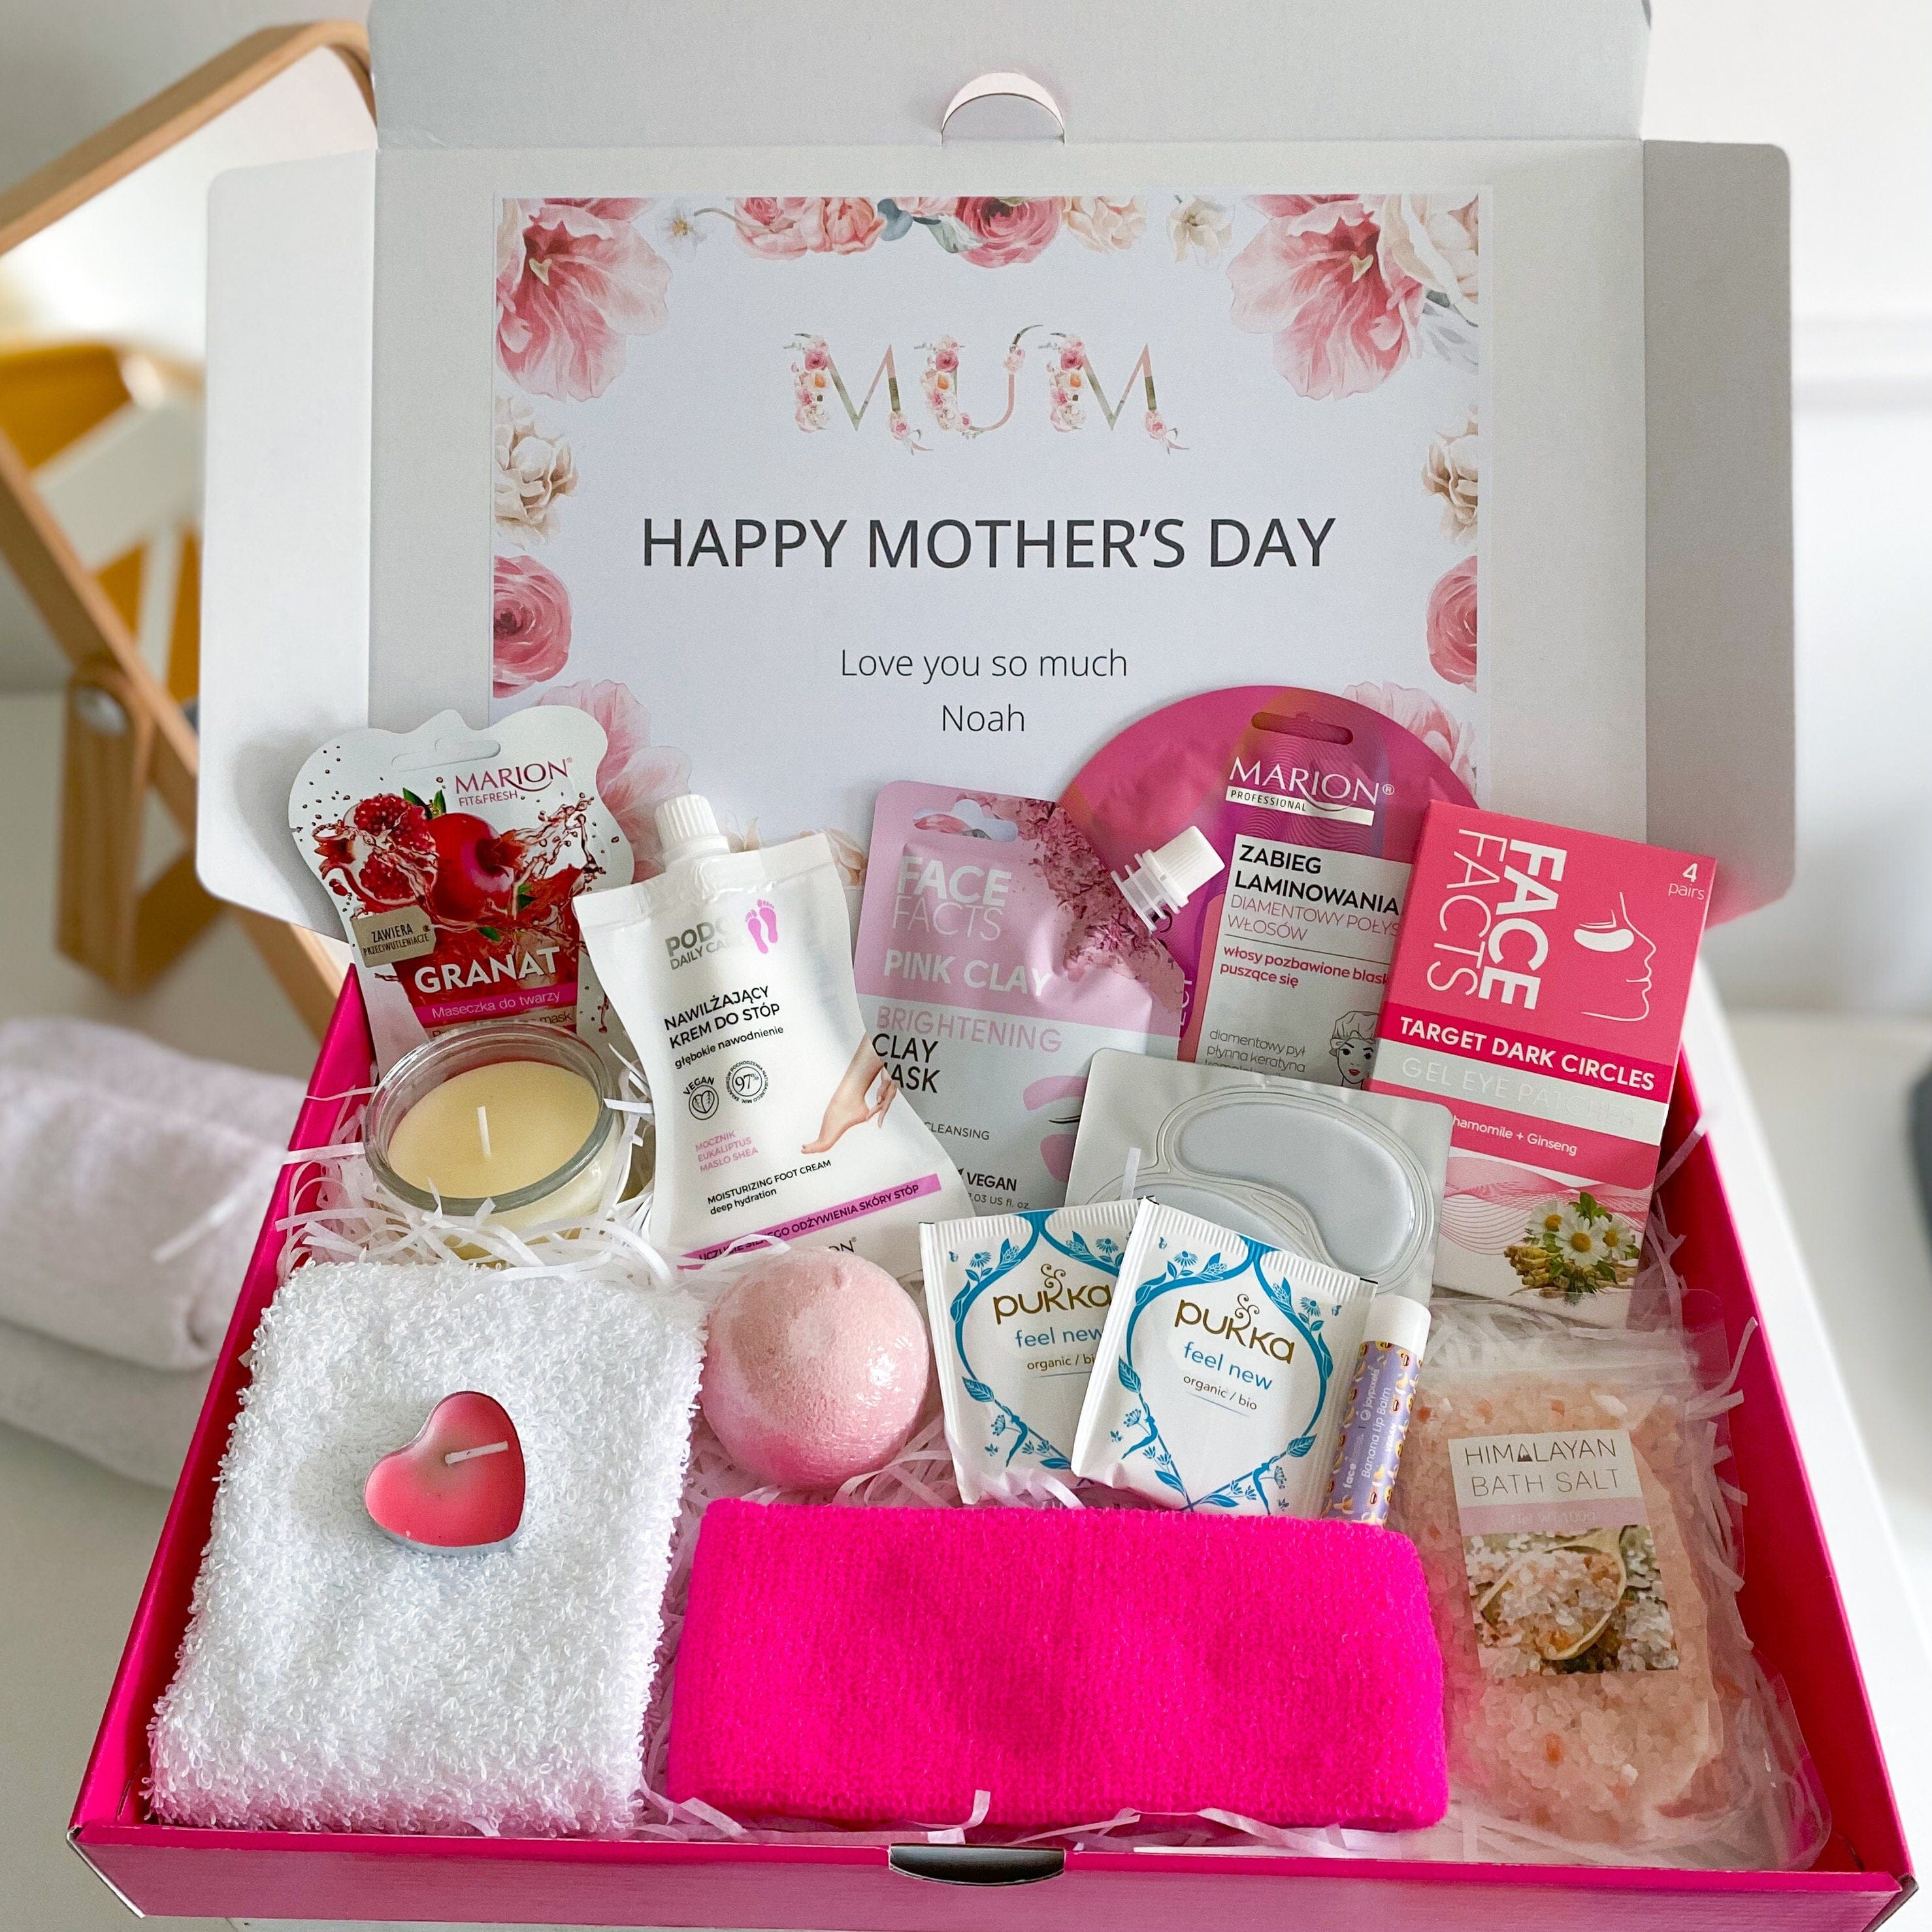 Personalised Mini Pamper Spa Kit, Relaxation Letterbox Gift For Her, Mum, Mother's Day Birthday Present